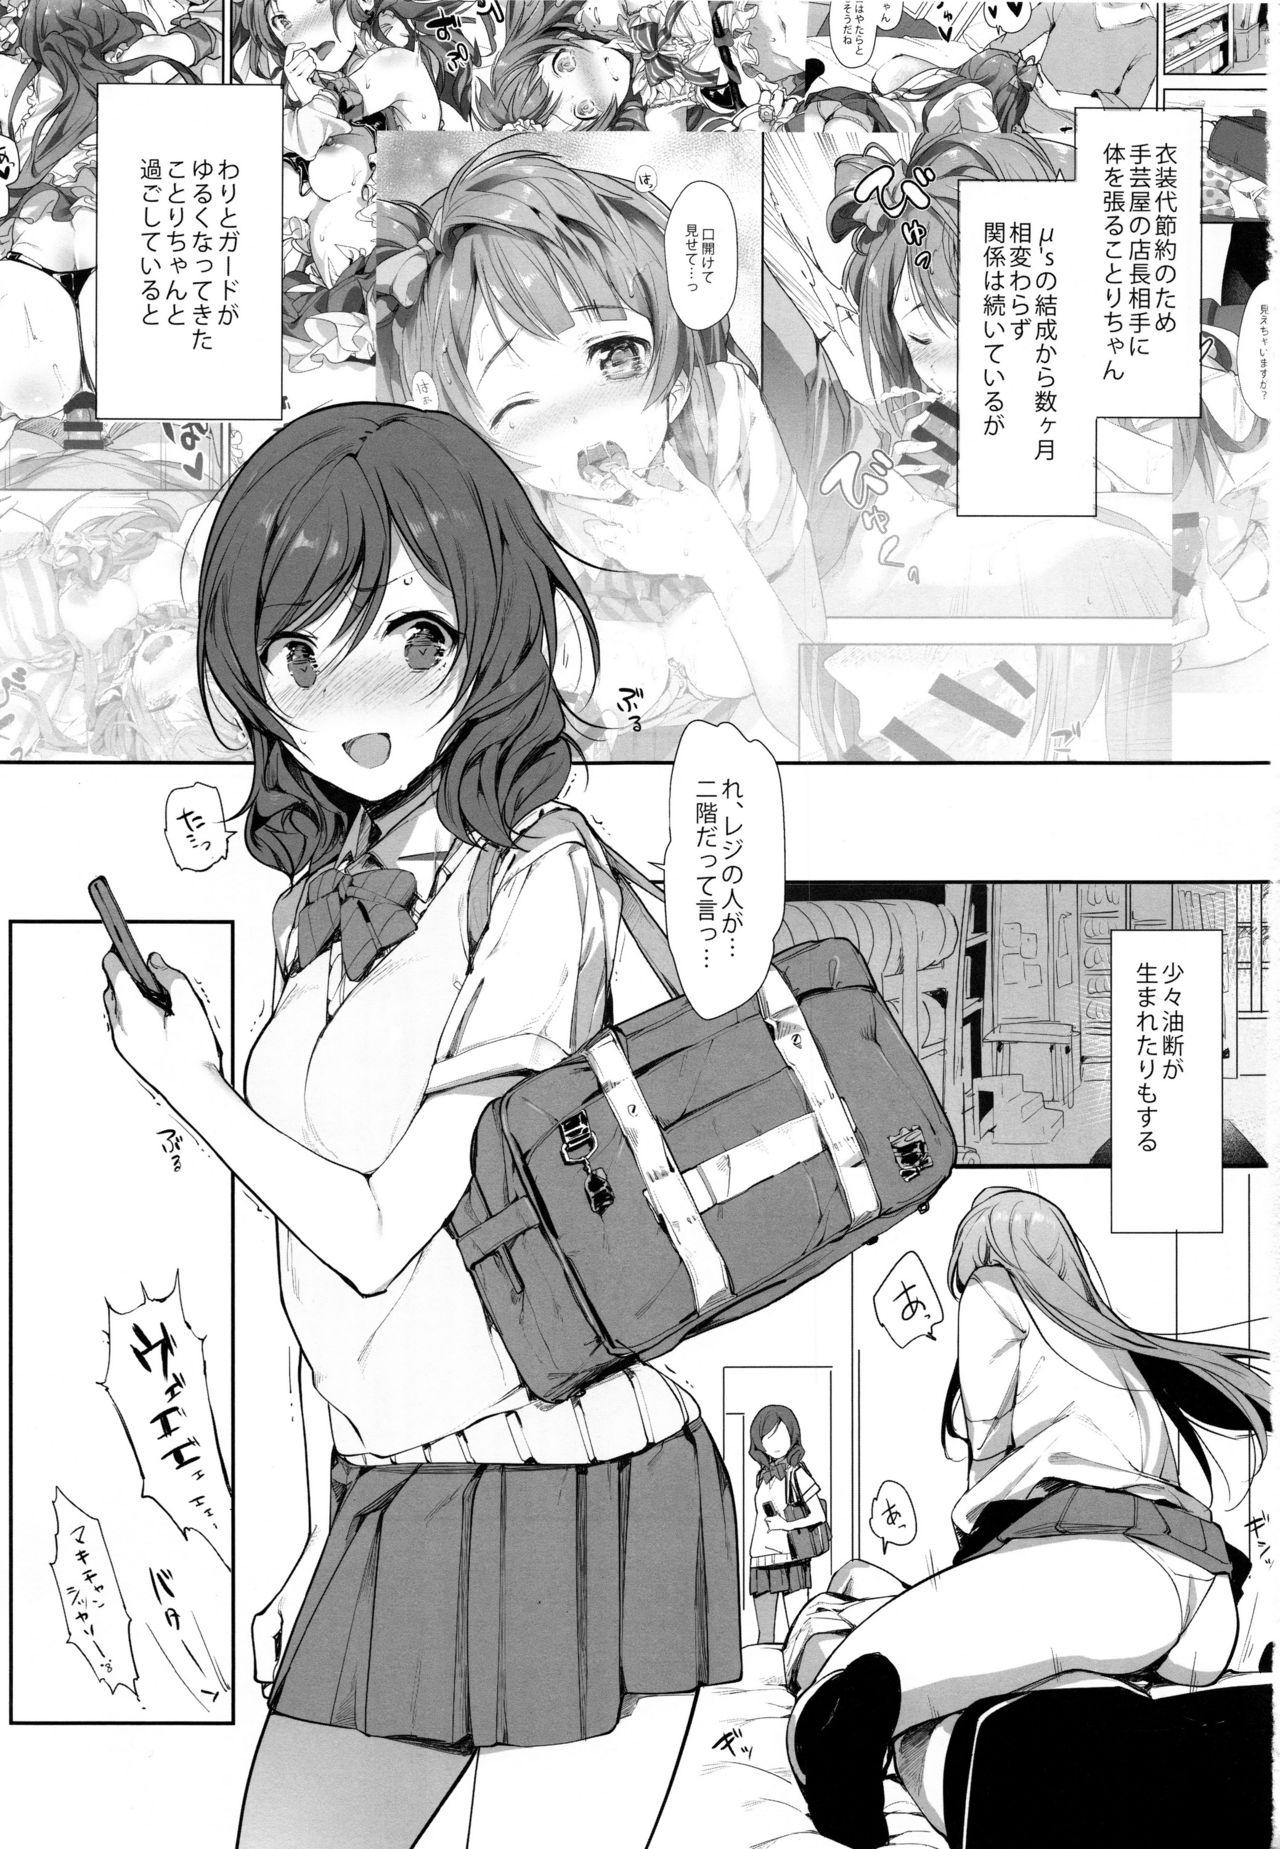 Mommy UR THE BEST!! - Love live Skirt - Page 2